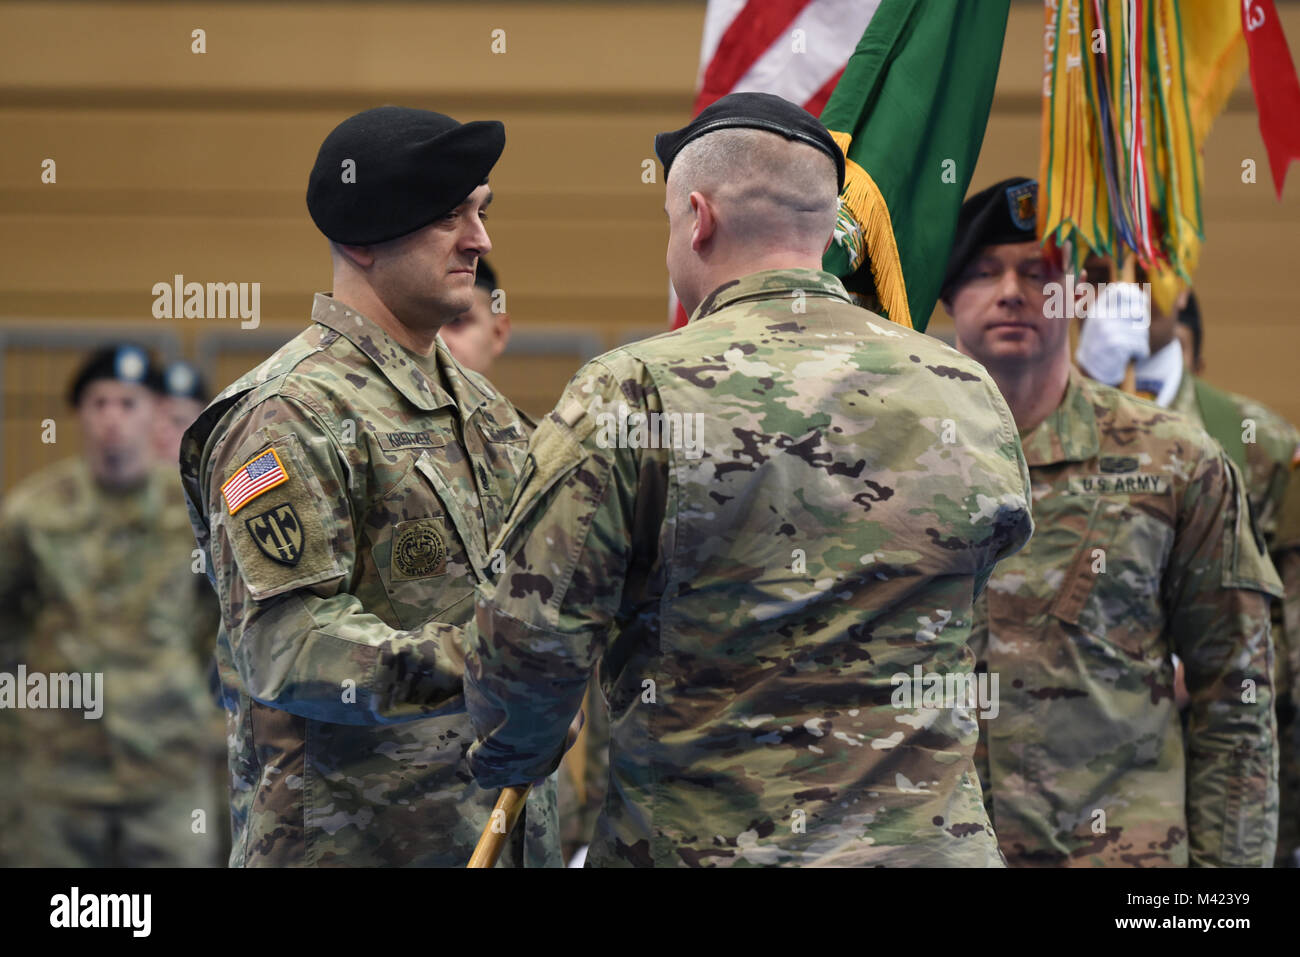 U.S. Army Command Sgt. Maj. Joshua Kreitzer, left, incoming senior enlisted advisor of 709th Military Police (MP) Battalion (BN), 18th MP Brigade, receives the colors from Lt. Col. Jeffrey Searl, commander of 709th MP BN, during a change of responsibility ceremony at Tower Barracks, Grafenwoehr, Germany, Feb. 09, 2018.   (U.S. Army photo by Markus Rauchenberger) Stock Photo